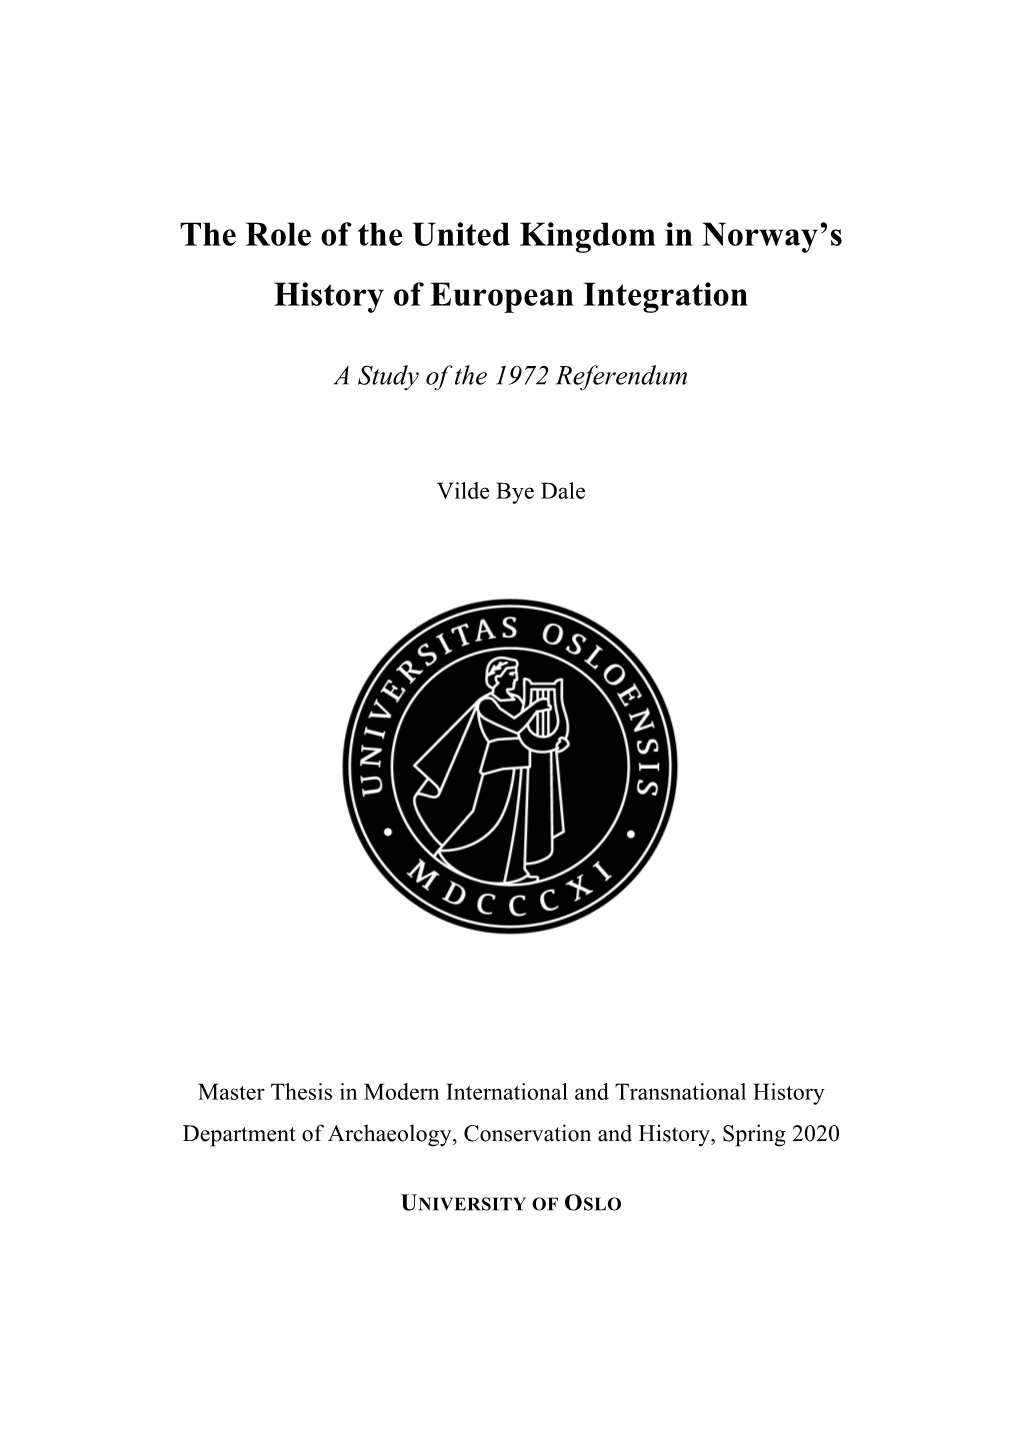 The Role of the United Kingdom in Norway's History of European